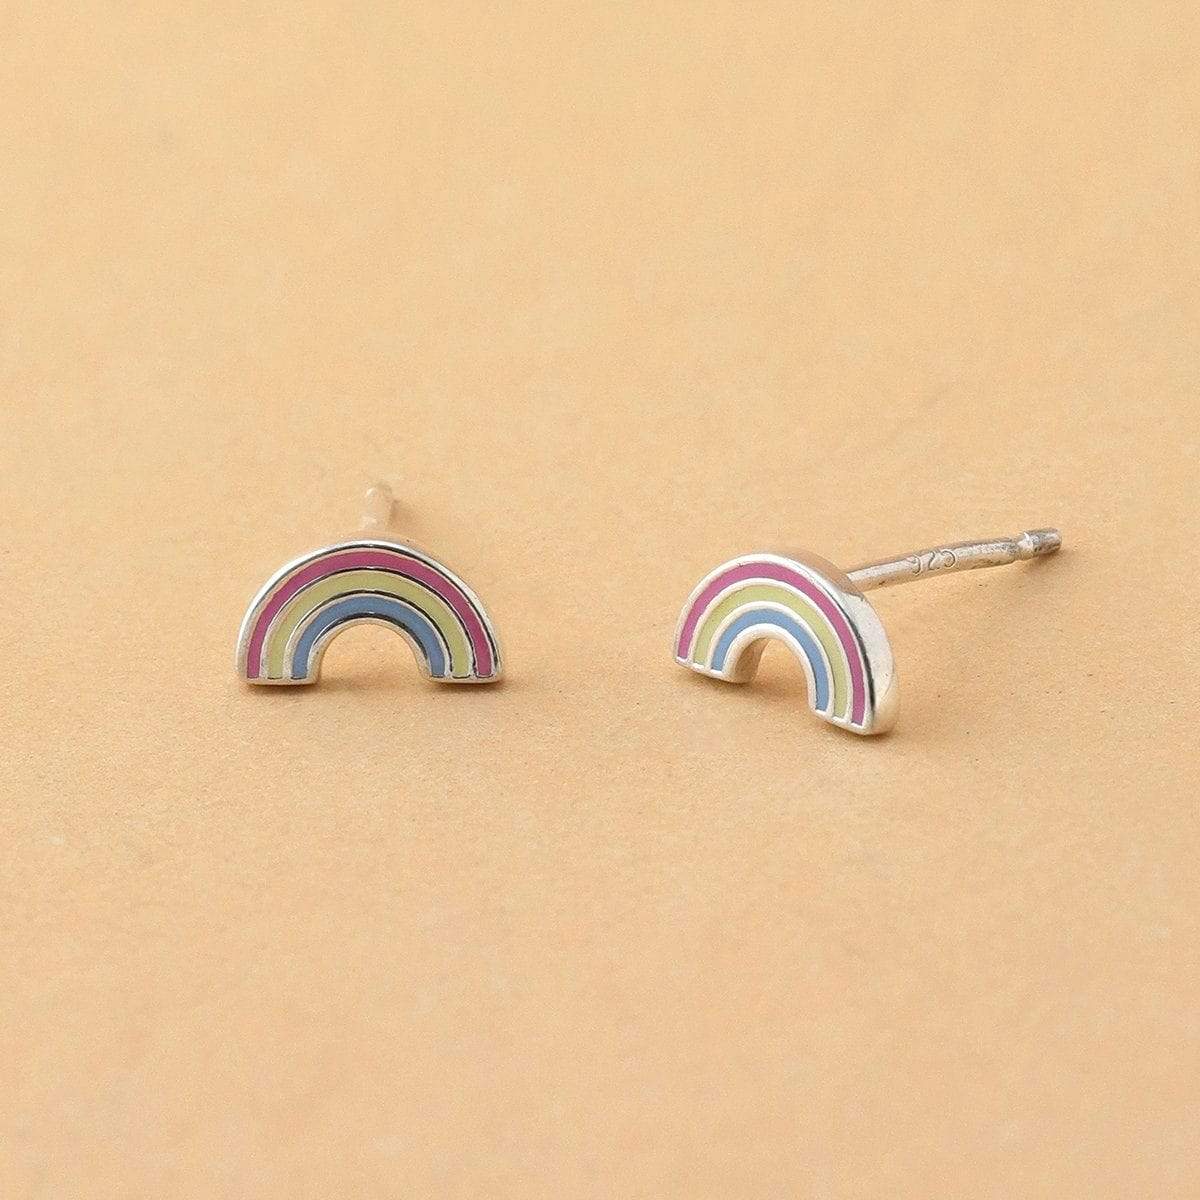 Boma Sterling Silver Post Earrings - Rainbow Multi Color Resin Fill    